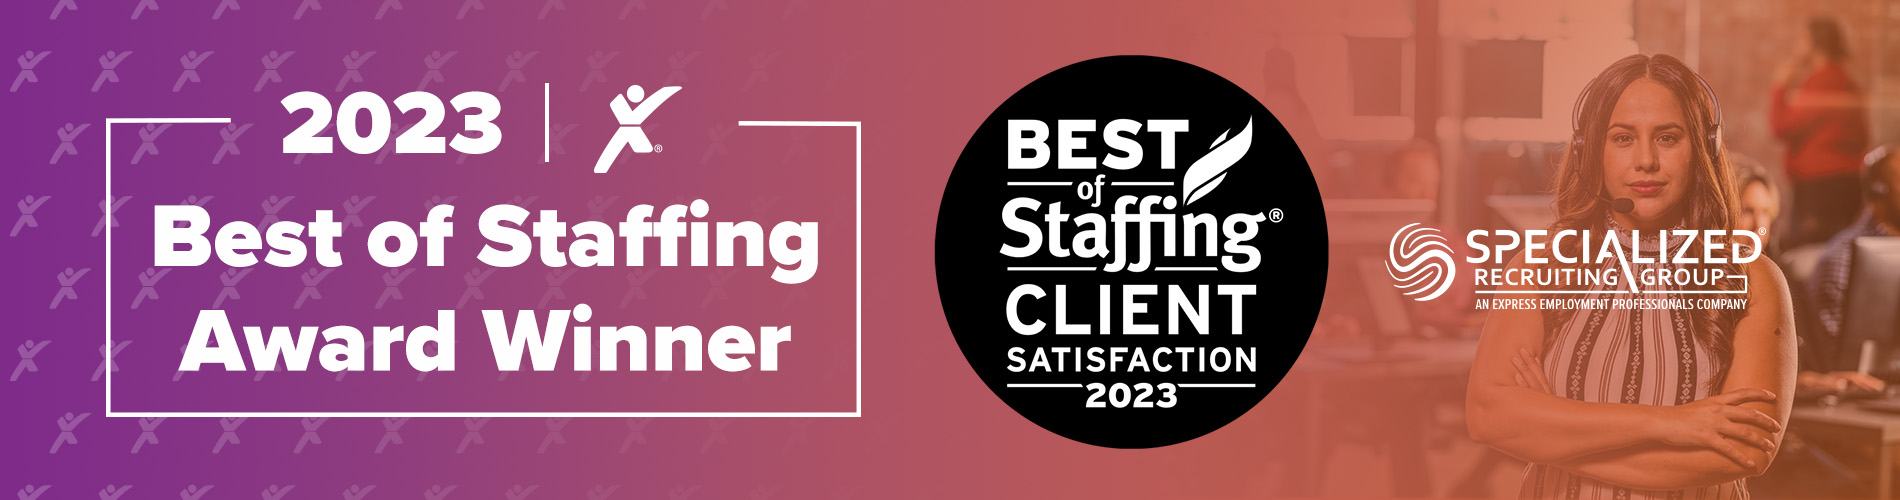 Best of Staffing 2023 SRG Home Page Banner